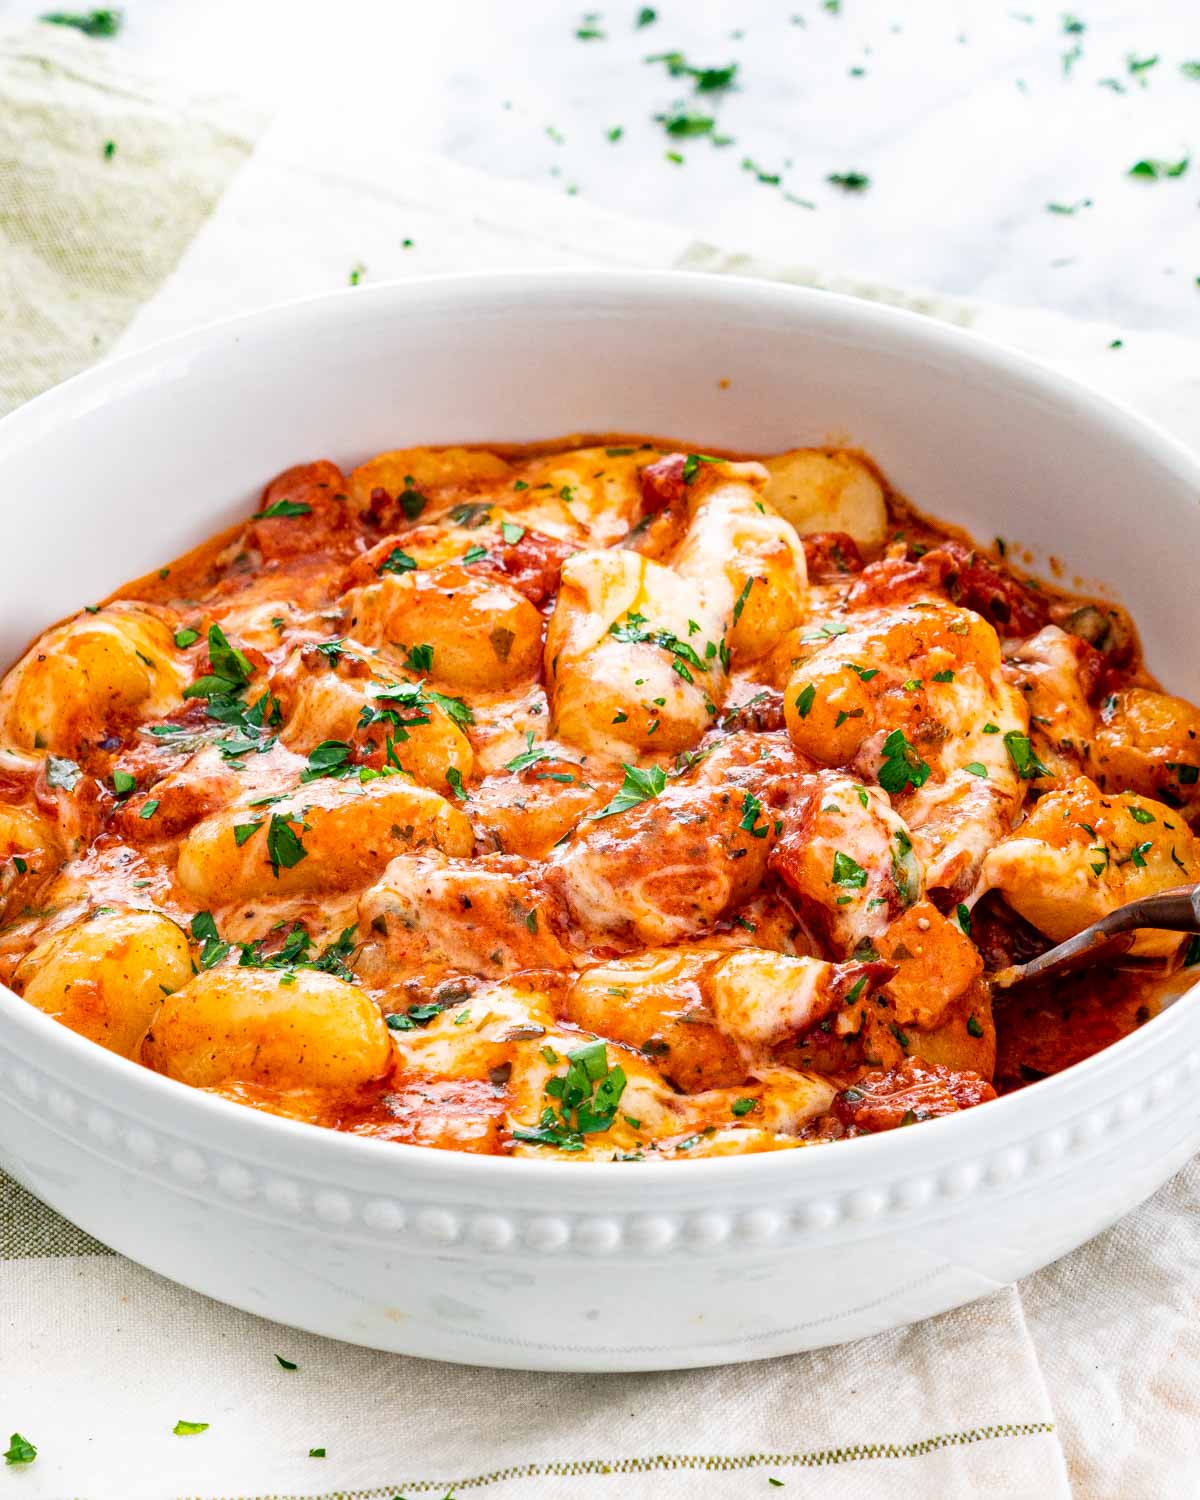 a white plate loaded with glorious cheesy gnocchi in a tomato bacon sauce